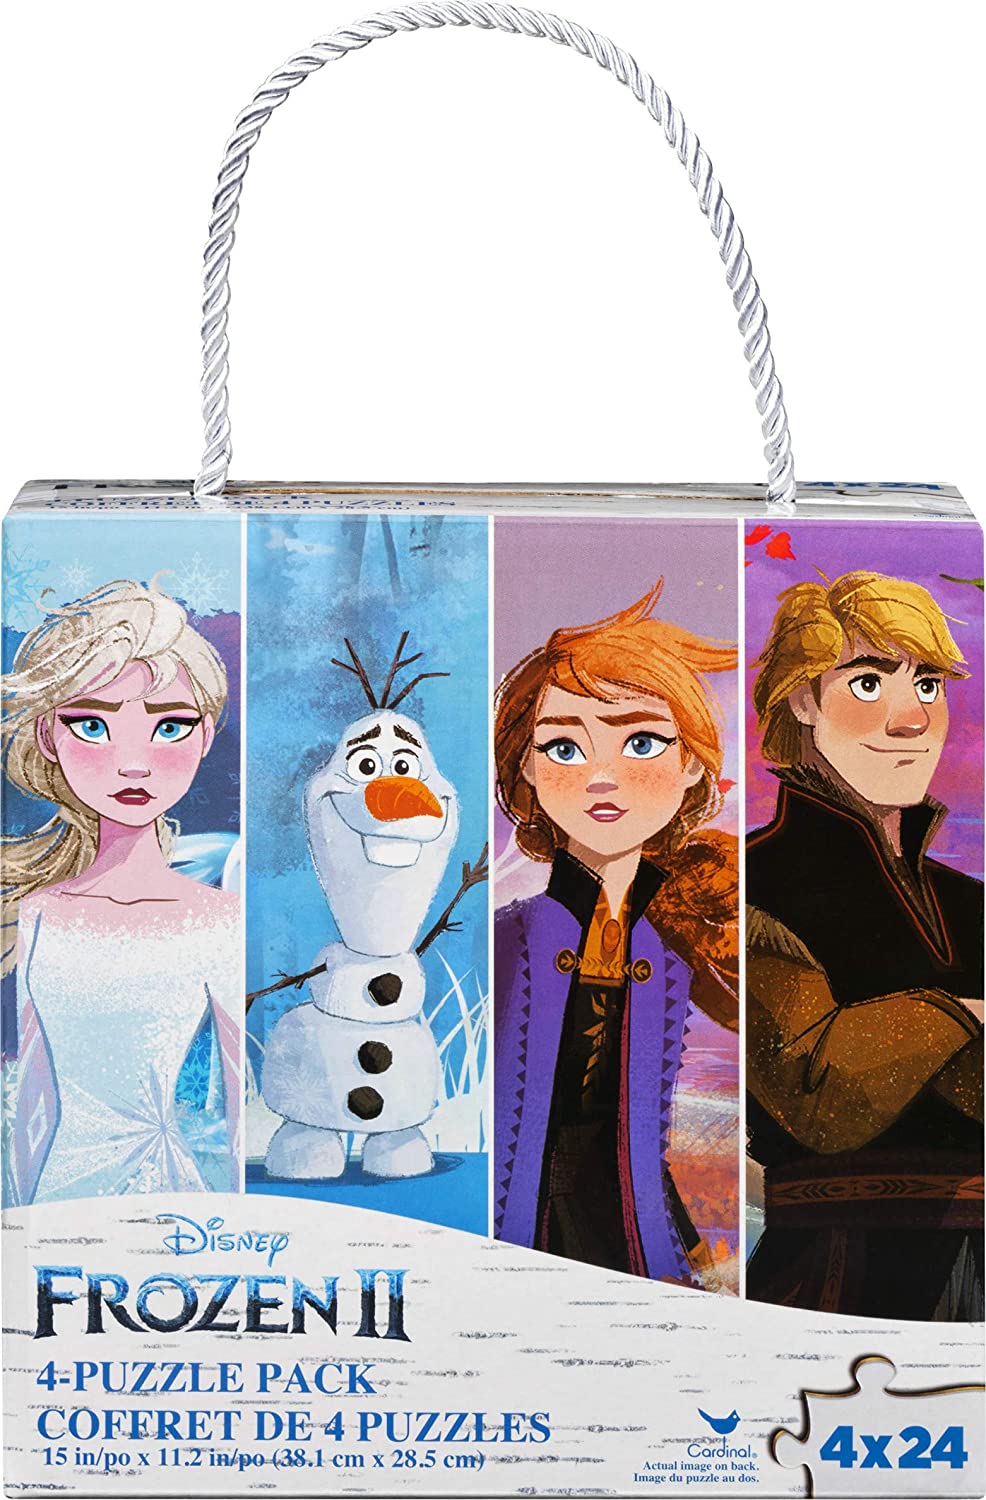 Disney Frozen 2 4-Pack of Jigsaw Puzzles for Families, Kids, and Preschoolers